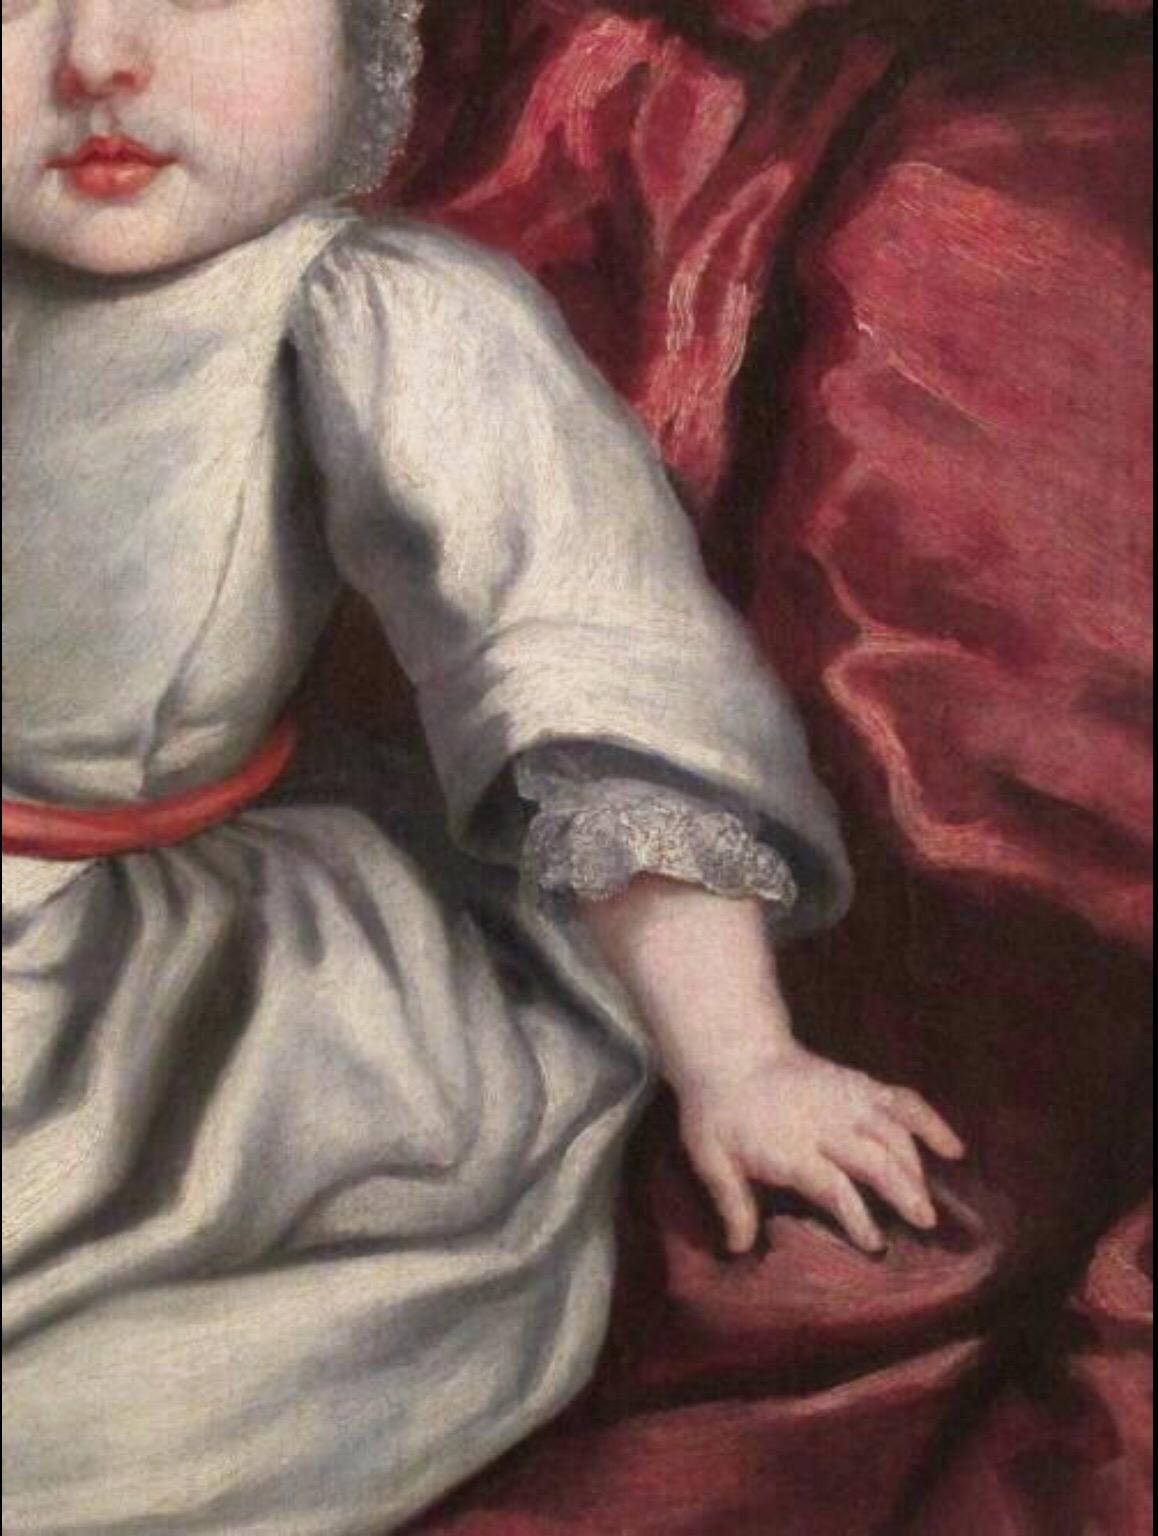 A Fine late 17thc Oil Portrait of a baby holding a coral teether.

ABOUT THE ARTIST ( Circle of Mary Beale )

Mary Beale (née Cradock; late March 1633 – 8 October 1699) was one of the most successful professional female Baroque-era portrait painters